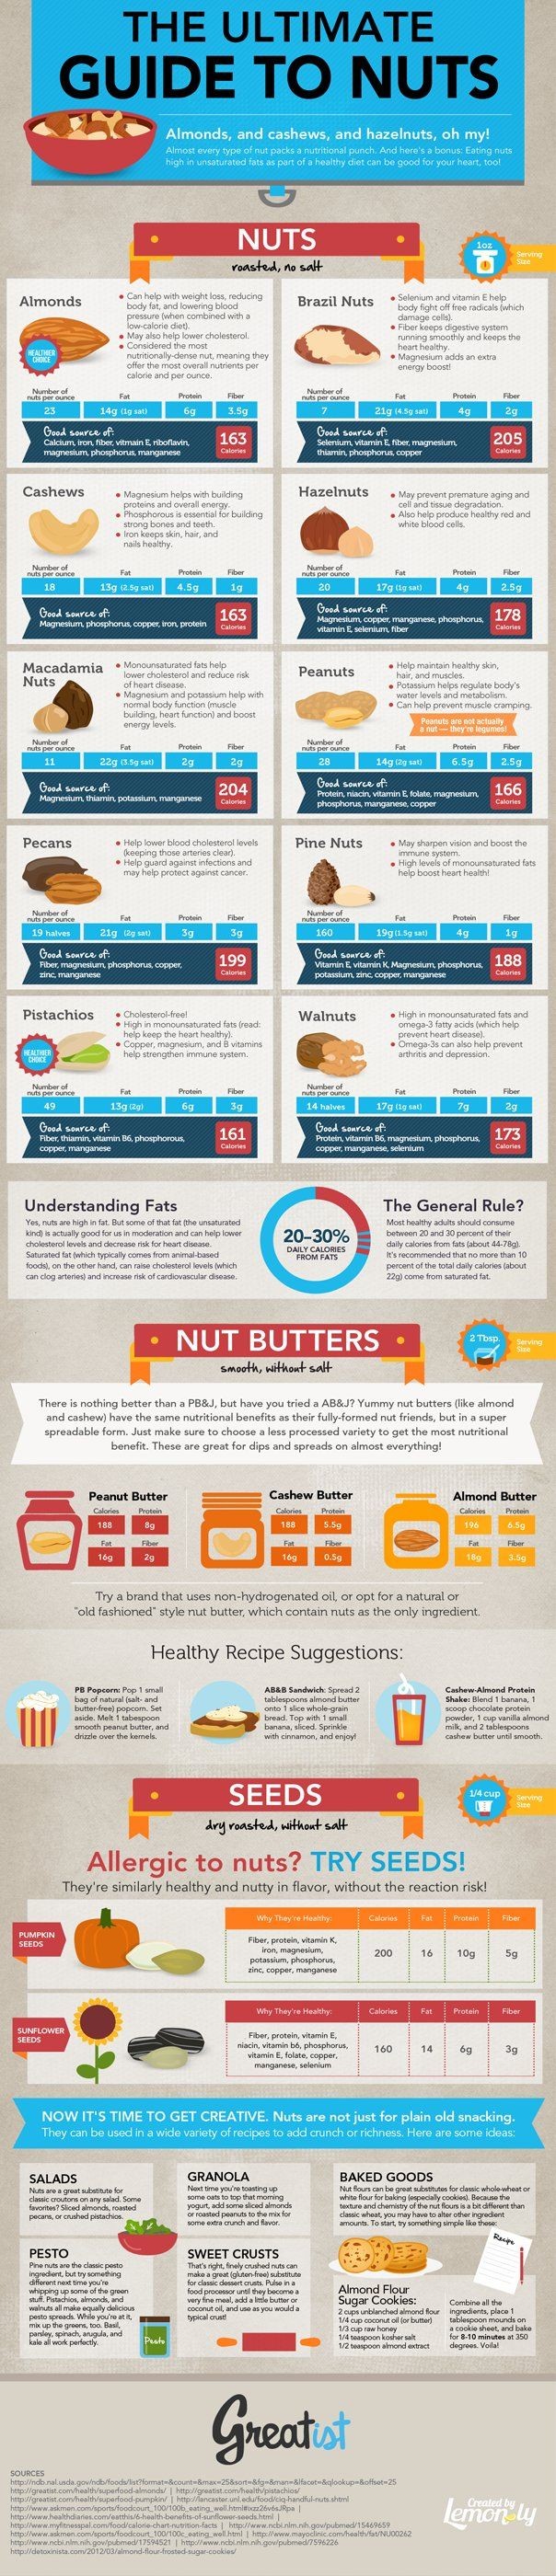 Ultimate guide to nuts (the food not the people)!...